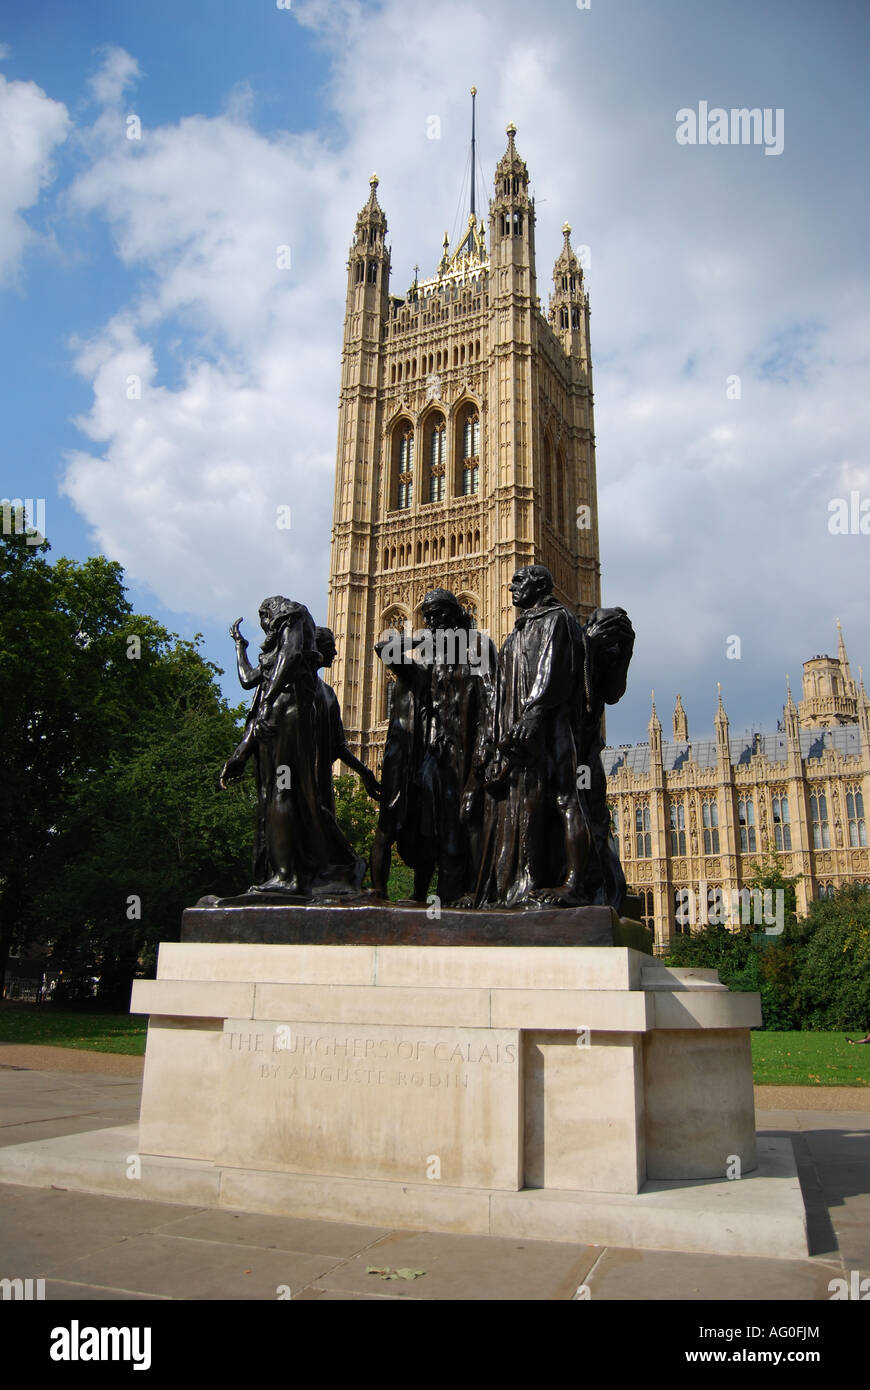 General View Of he Burgers of Calais Monument At The Houses of Parliament Stock Photo